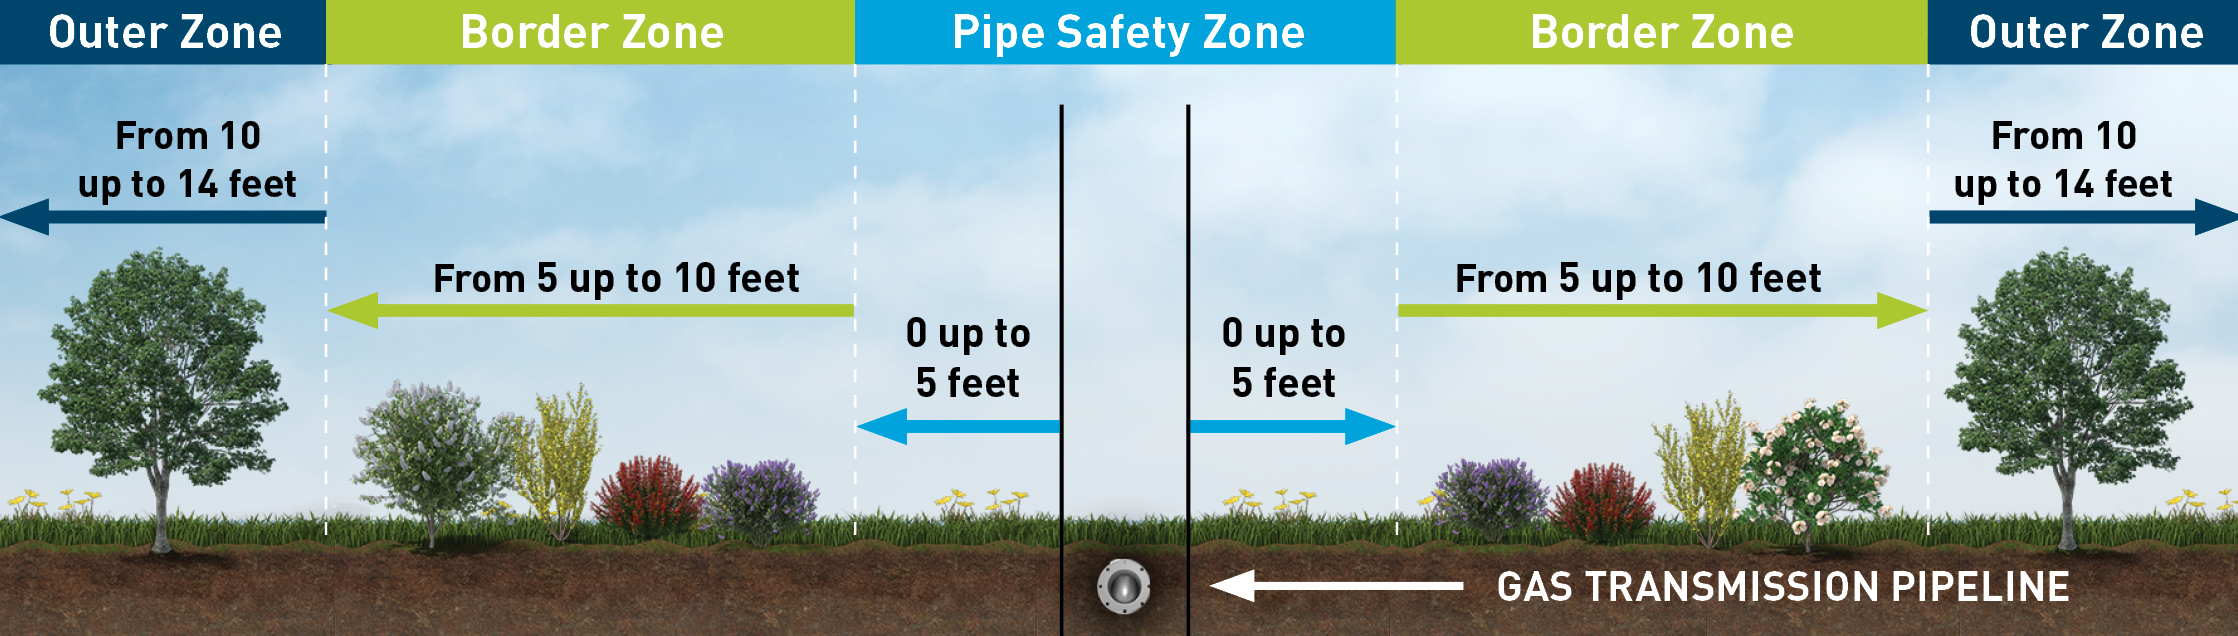 An illustrated guide to safe landscaping that depicts a gas transmission line surrounded by five-foot pipe safety zone. Outside of this critical pipe safety zone is a five to 10-foot Border Zone. Outside of this secondary zone is a 10 to 14-foot Outer Zone.